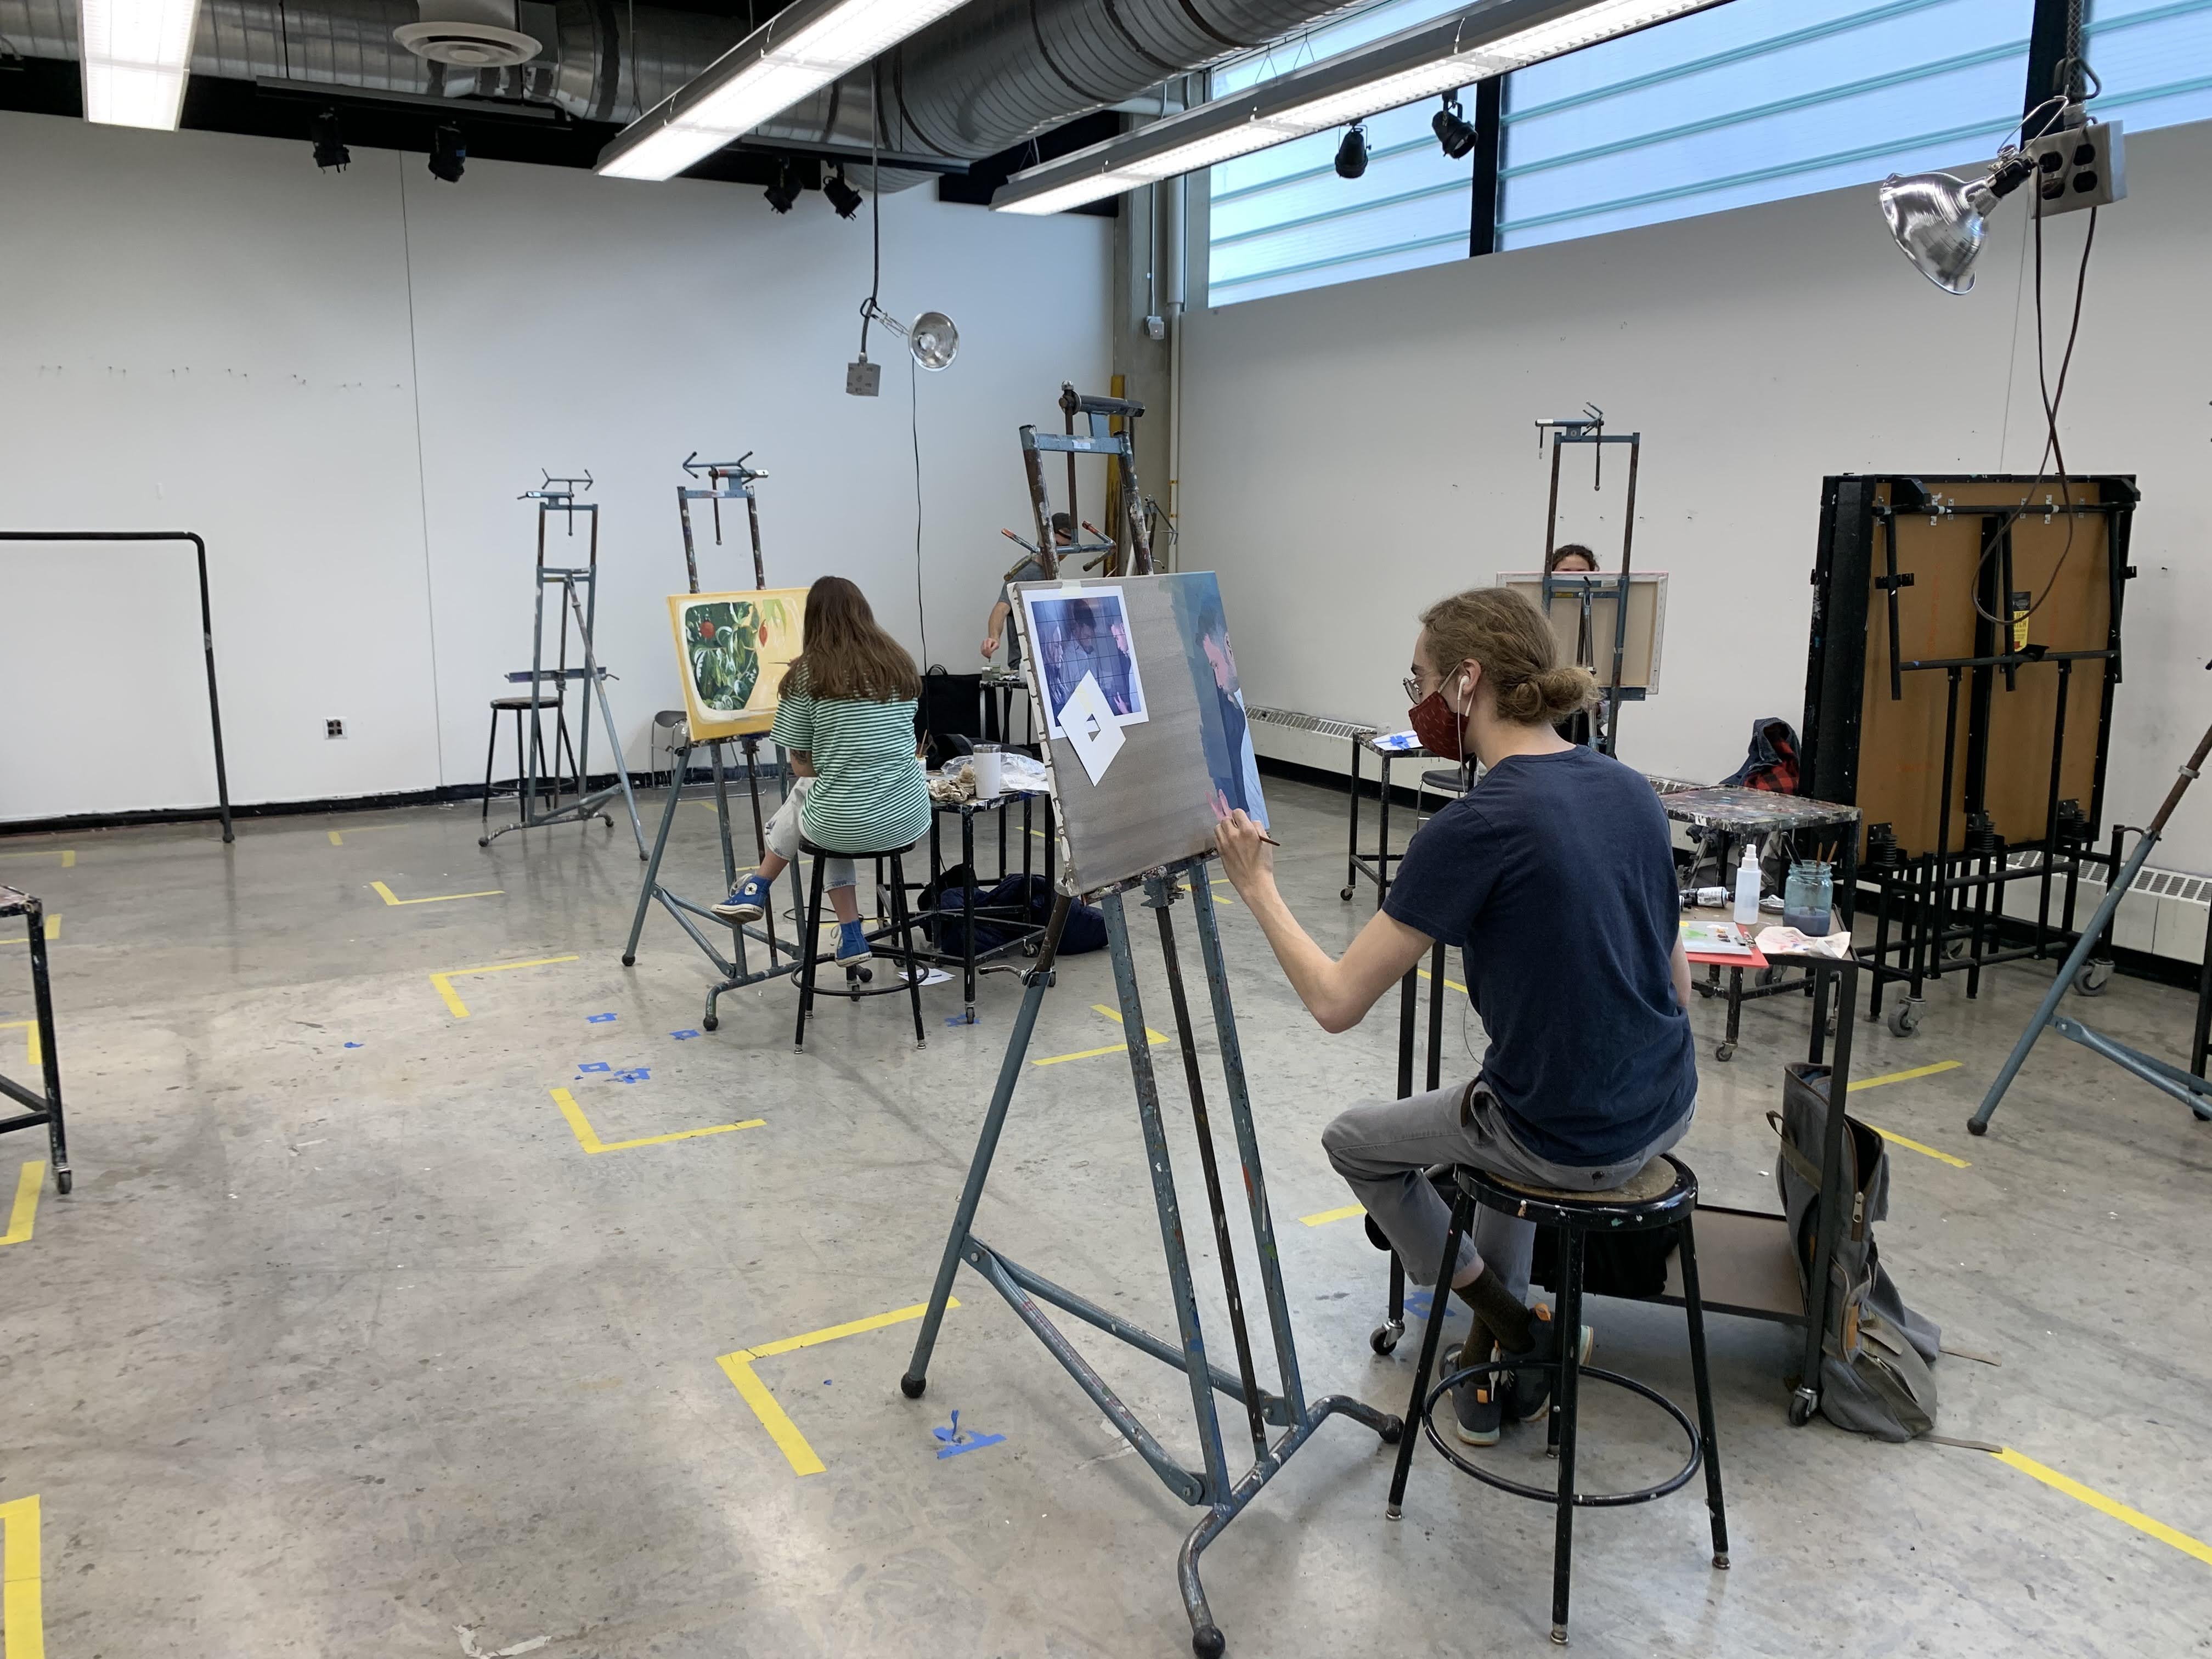 Students painting on spaced out easels in painting studio